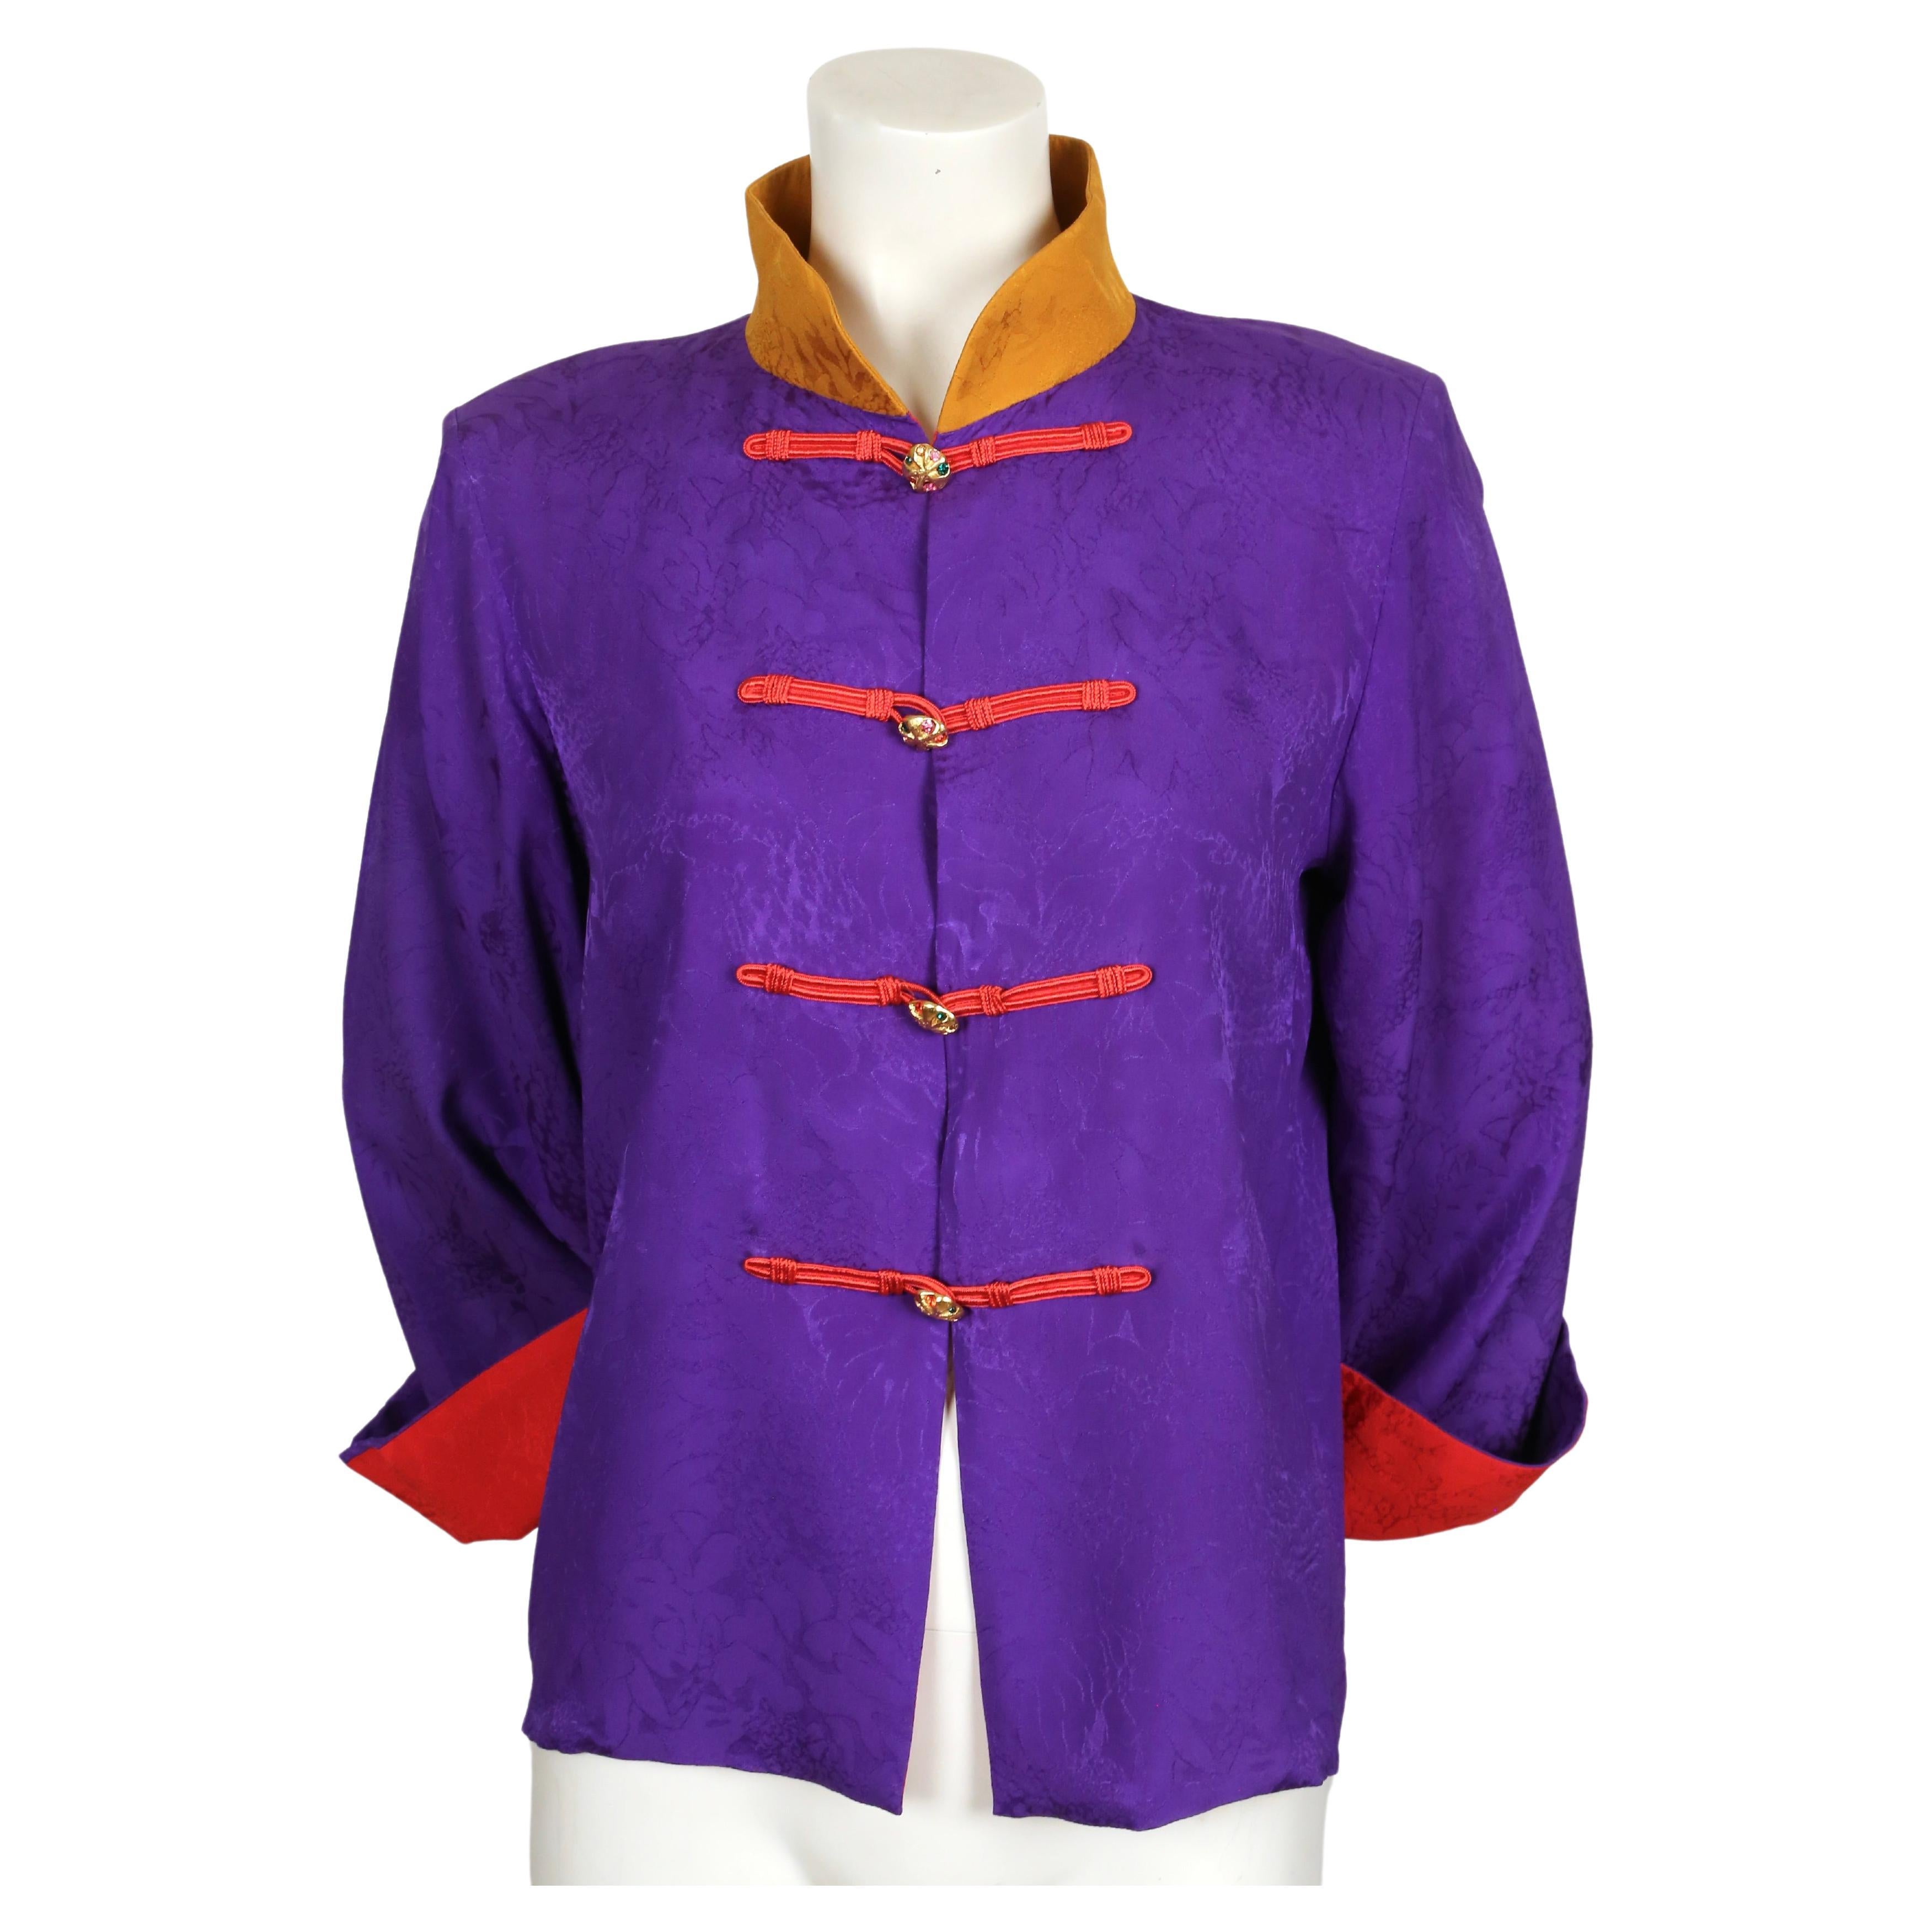 Vibrant purple, mustard and red silk jacket with decorative frog closure and vivid rhinestone buttons. The jacket features a boxy cut with a stand-up collar and has a contrast lining so sleeves can be cuffed. Labeled a French size 38.  Best fits a